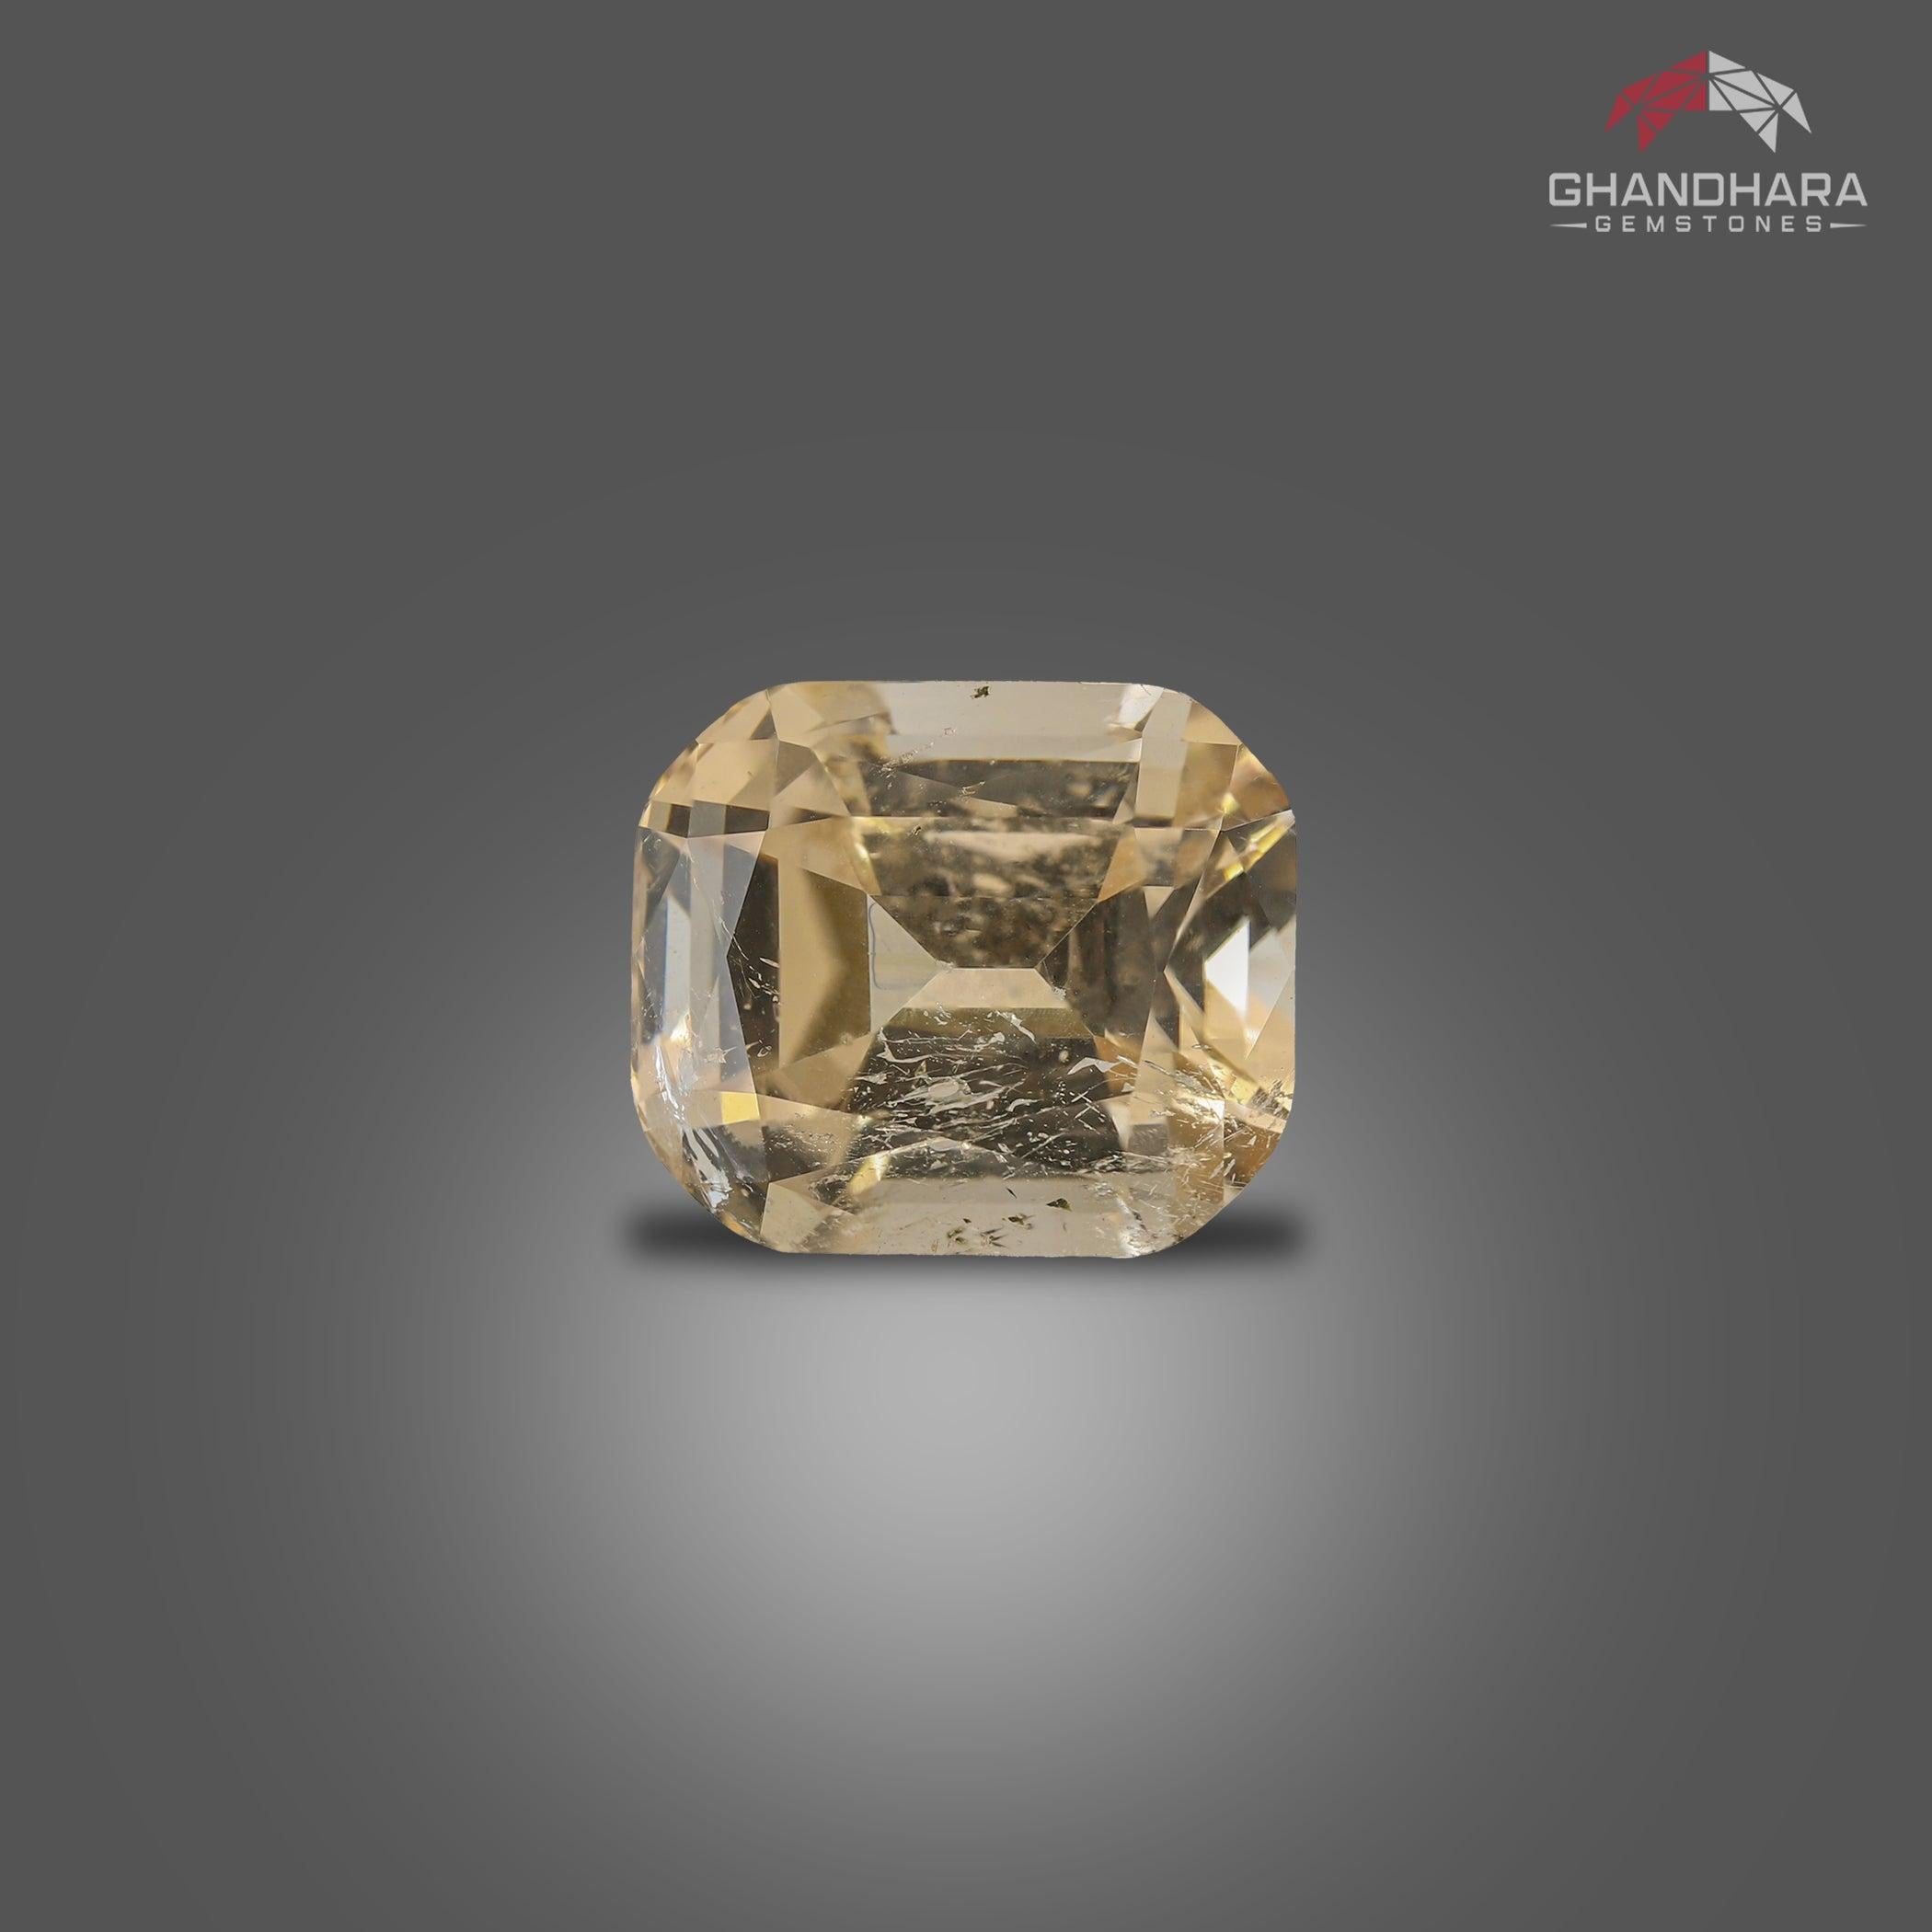 Deep Golden Imperial Topaz of 7.20 carats from Pakistan has a wonderful cut in a Cushion shape, incredible Golden color. Great brilliance. This gem is SI Clarity. 
Product Information:
GEMSTONE NAME: Deep Golden Imperial Topaz
WEIGHT:	7.20